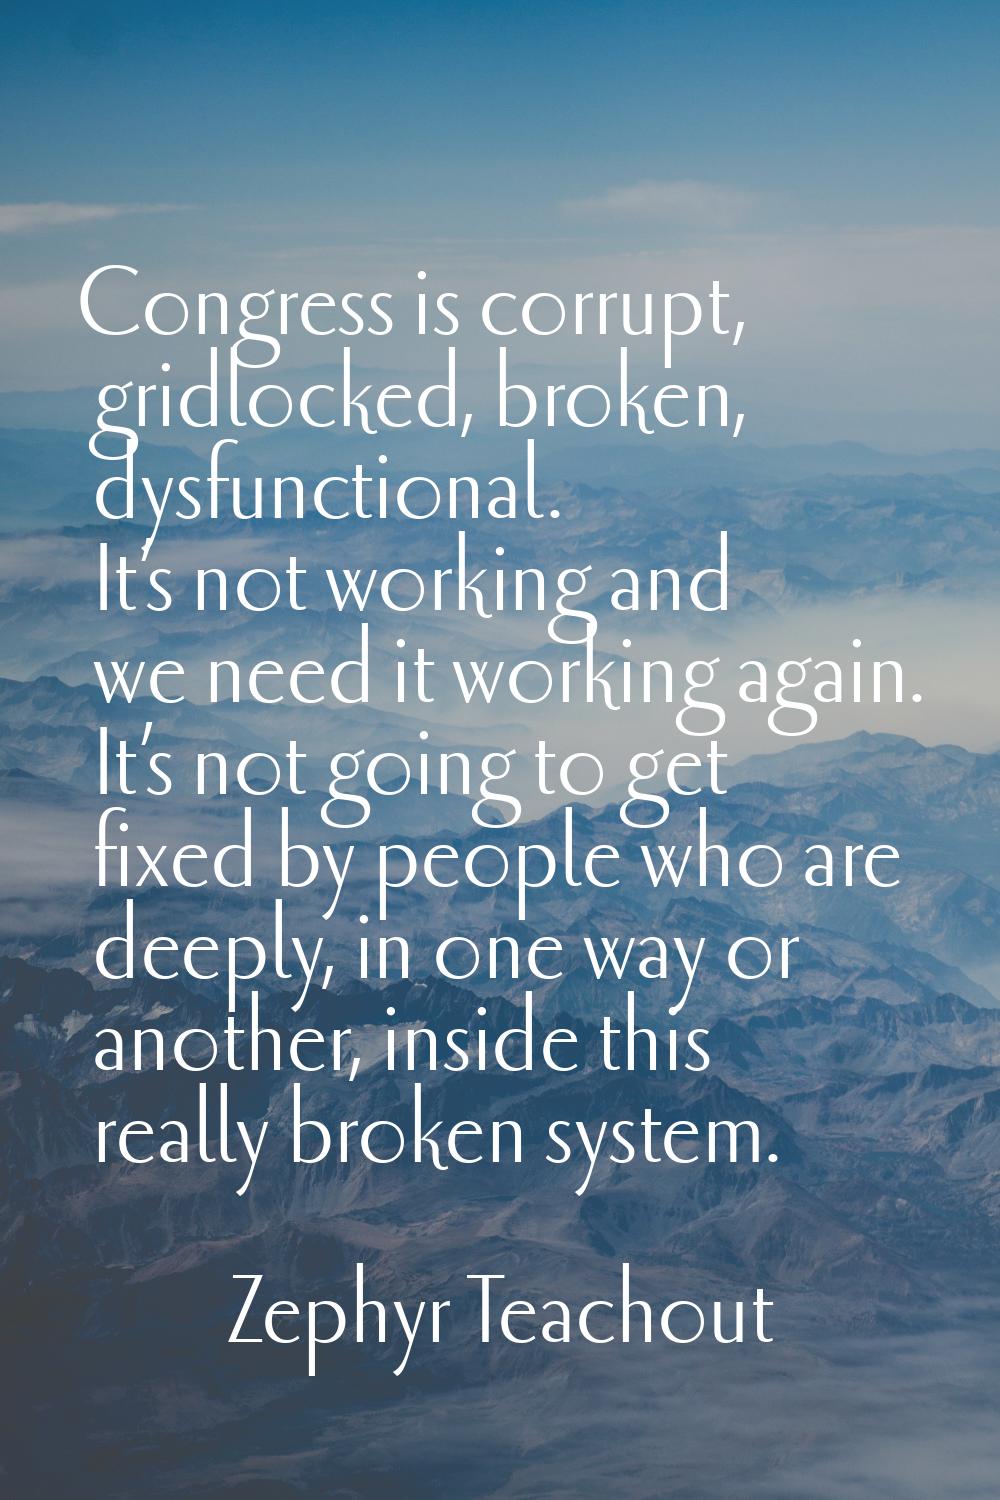 Congress is corrupt, gridlocked, broken, dysfunctional. It’s not working and we need it working aga